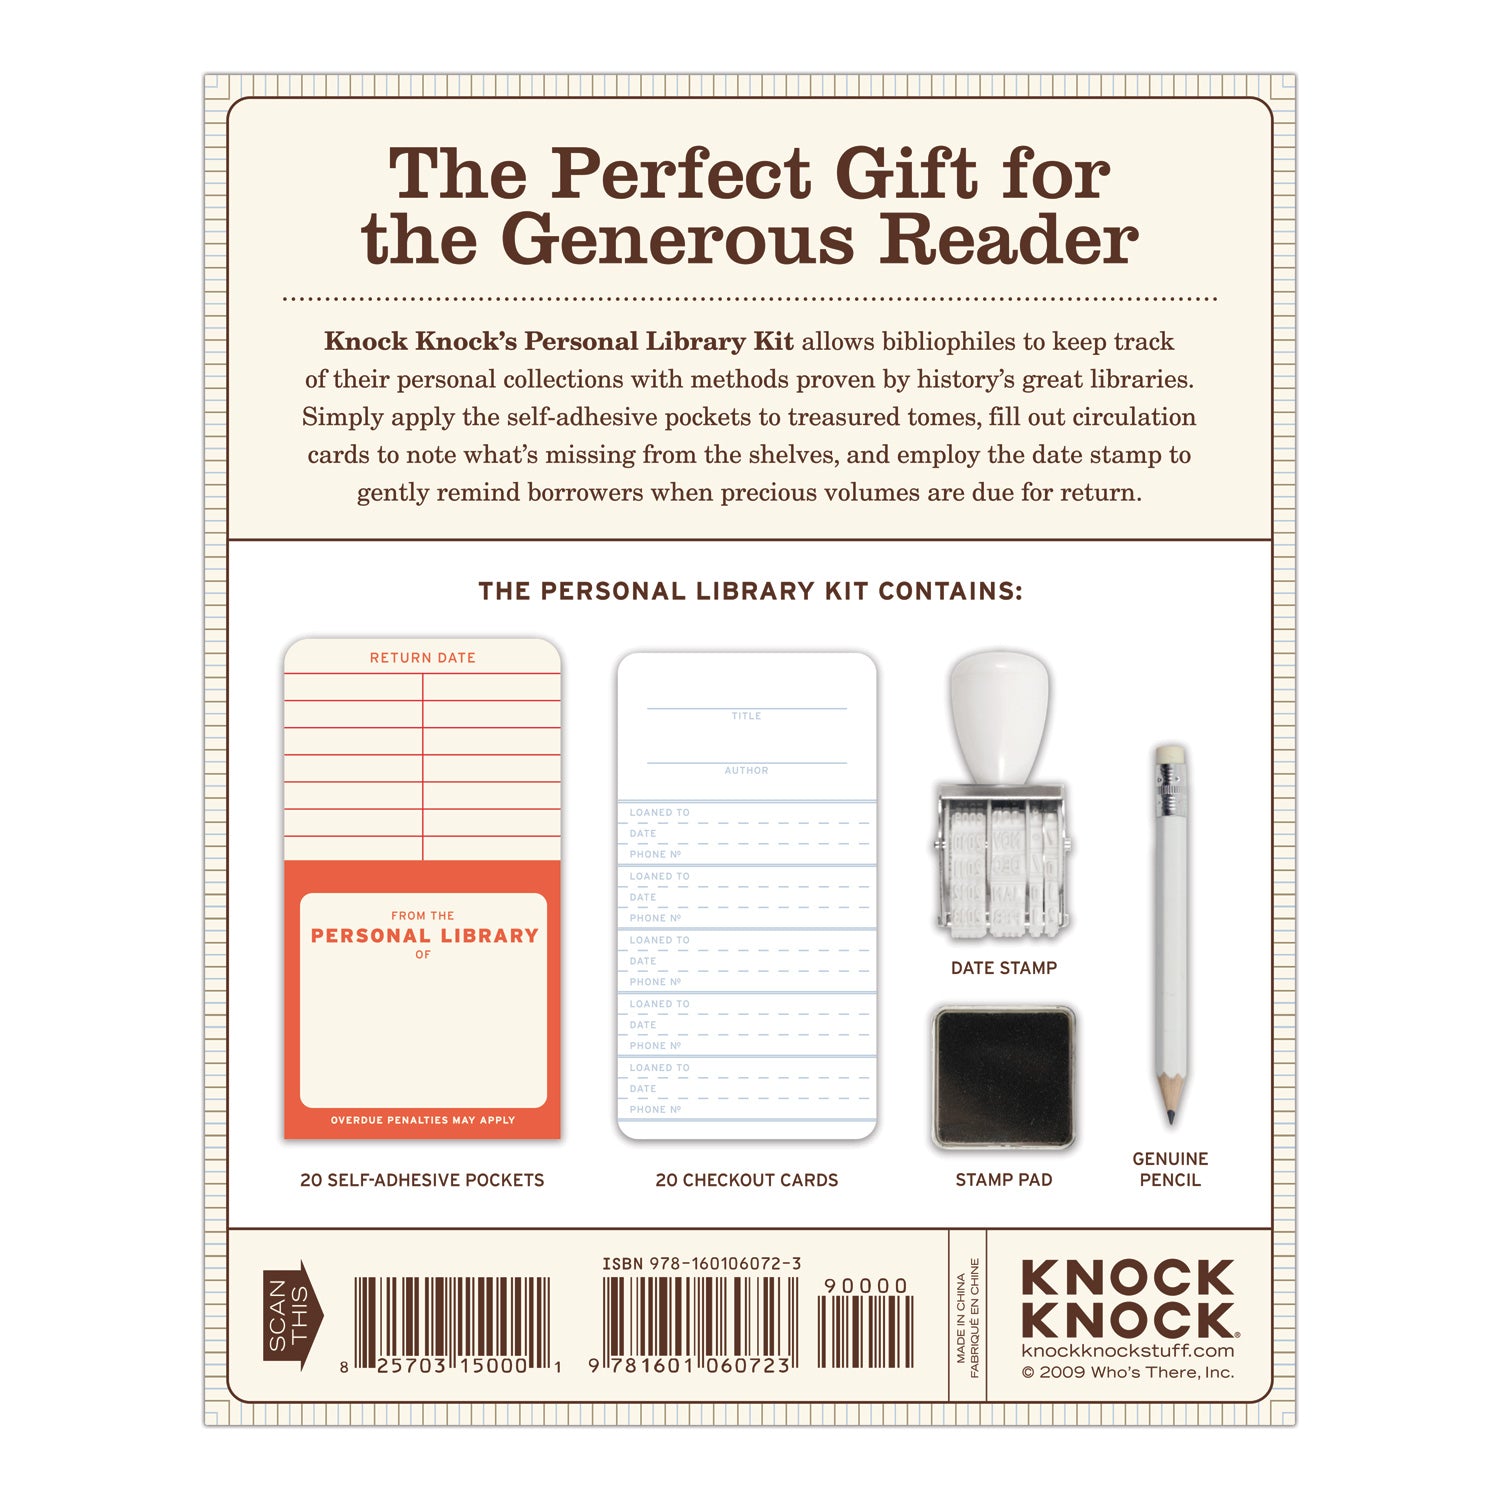 Knock Knock - Personal Library Kit: Self-Help Book Edition – The Painted  Porch Bookshop